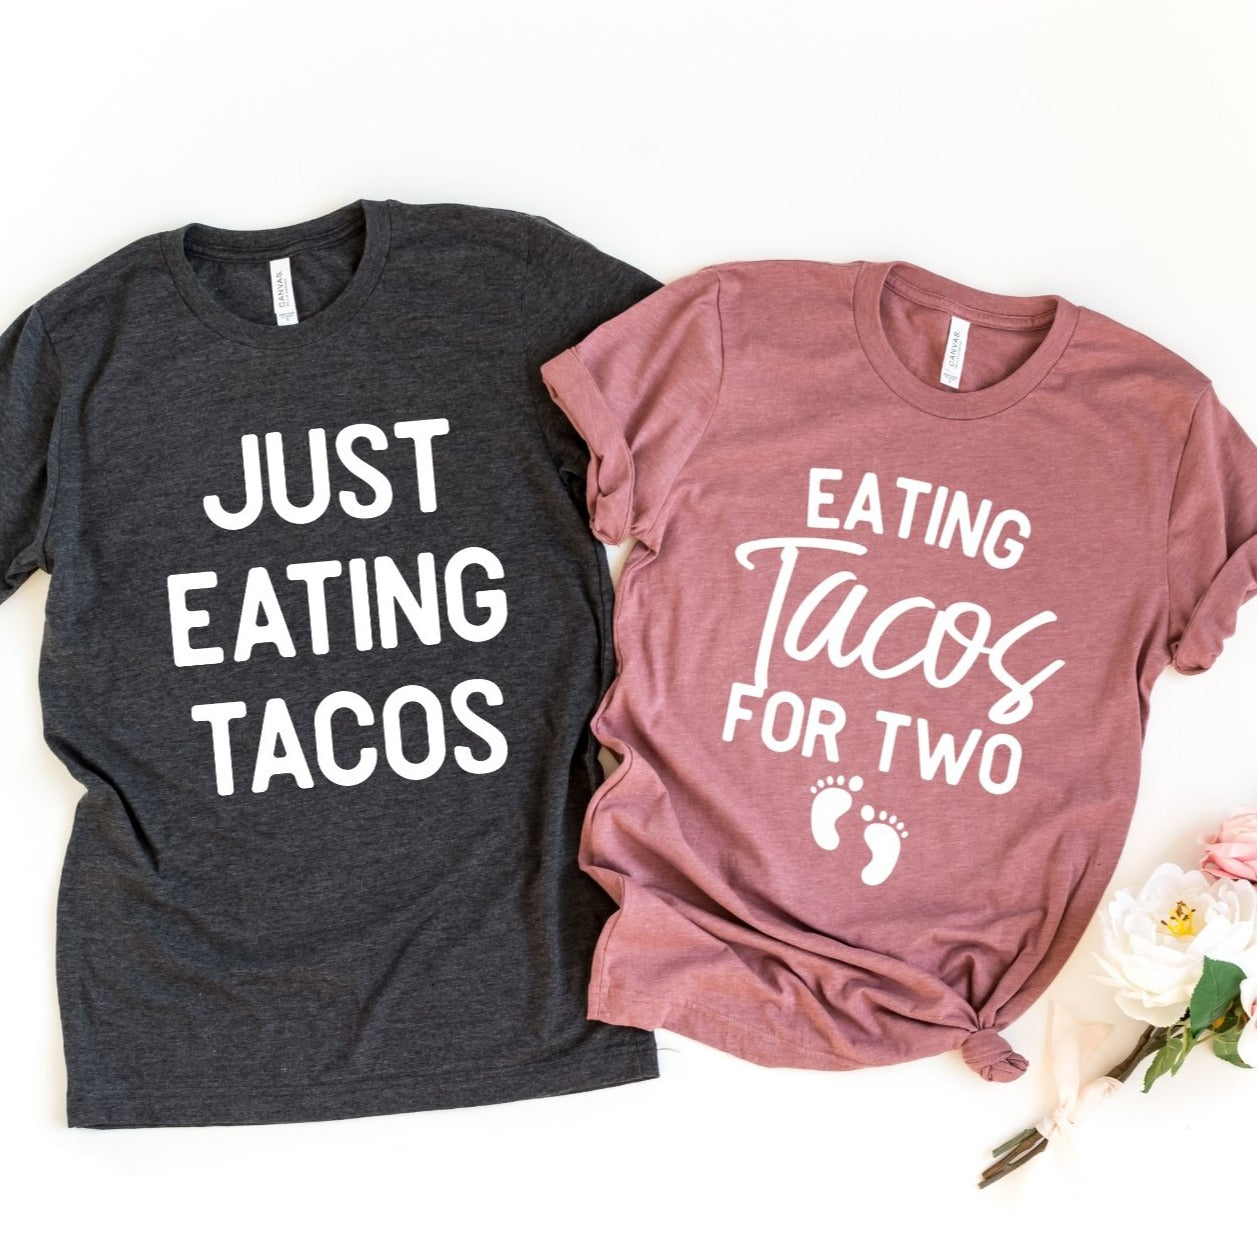 Eating Tacos for Two & Just Eating Tacos